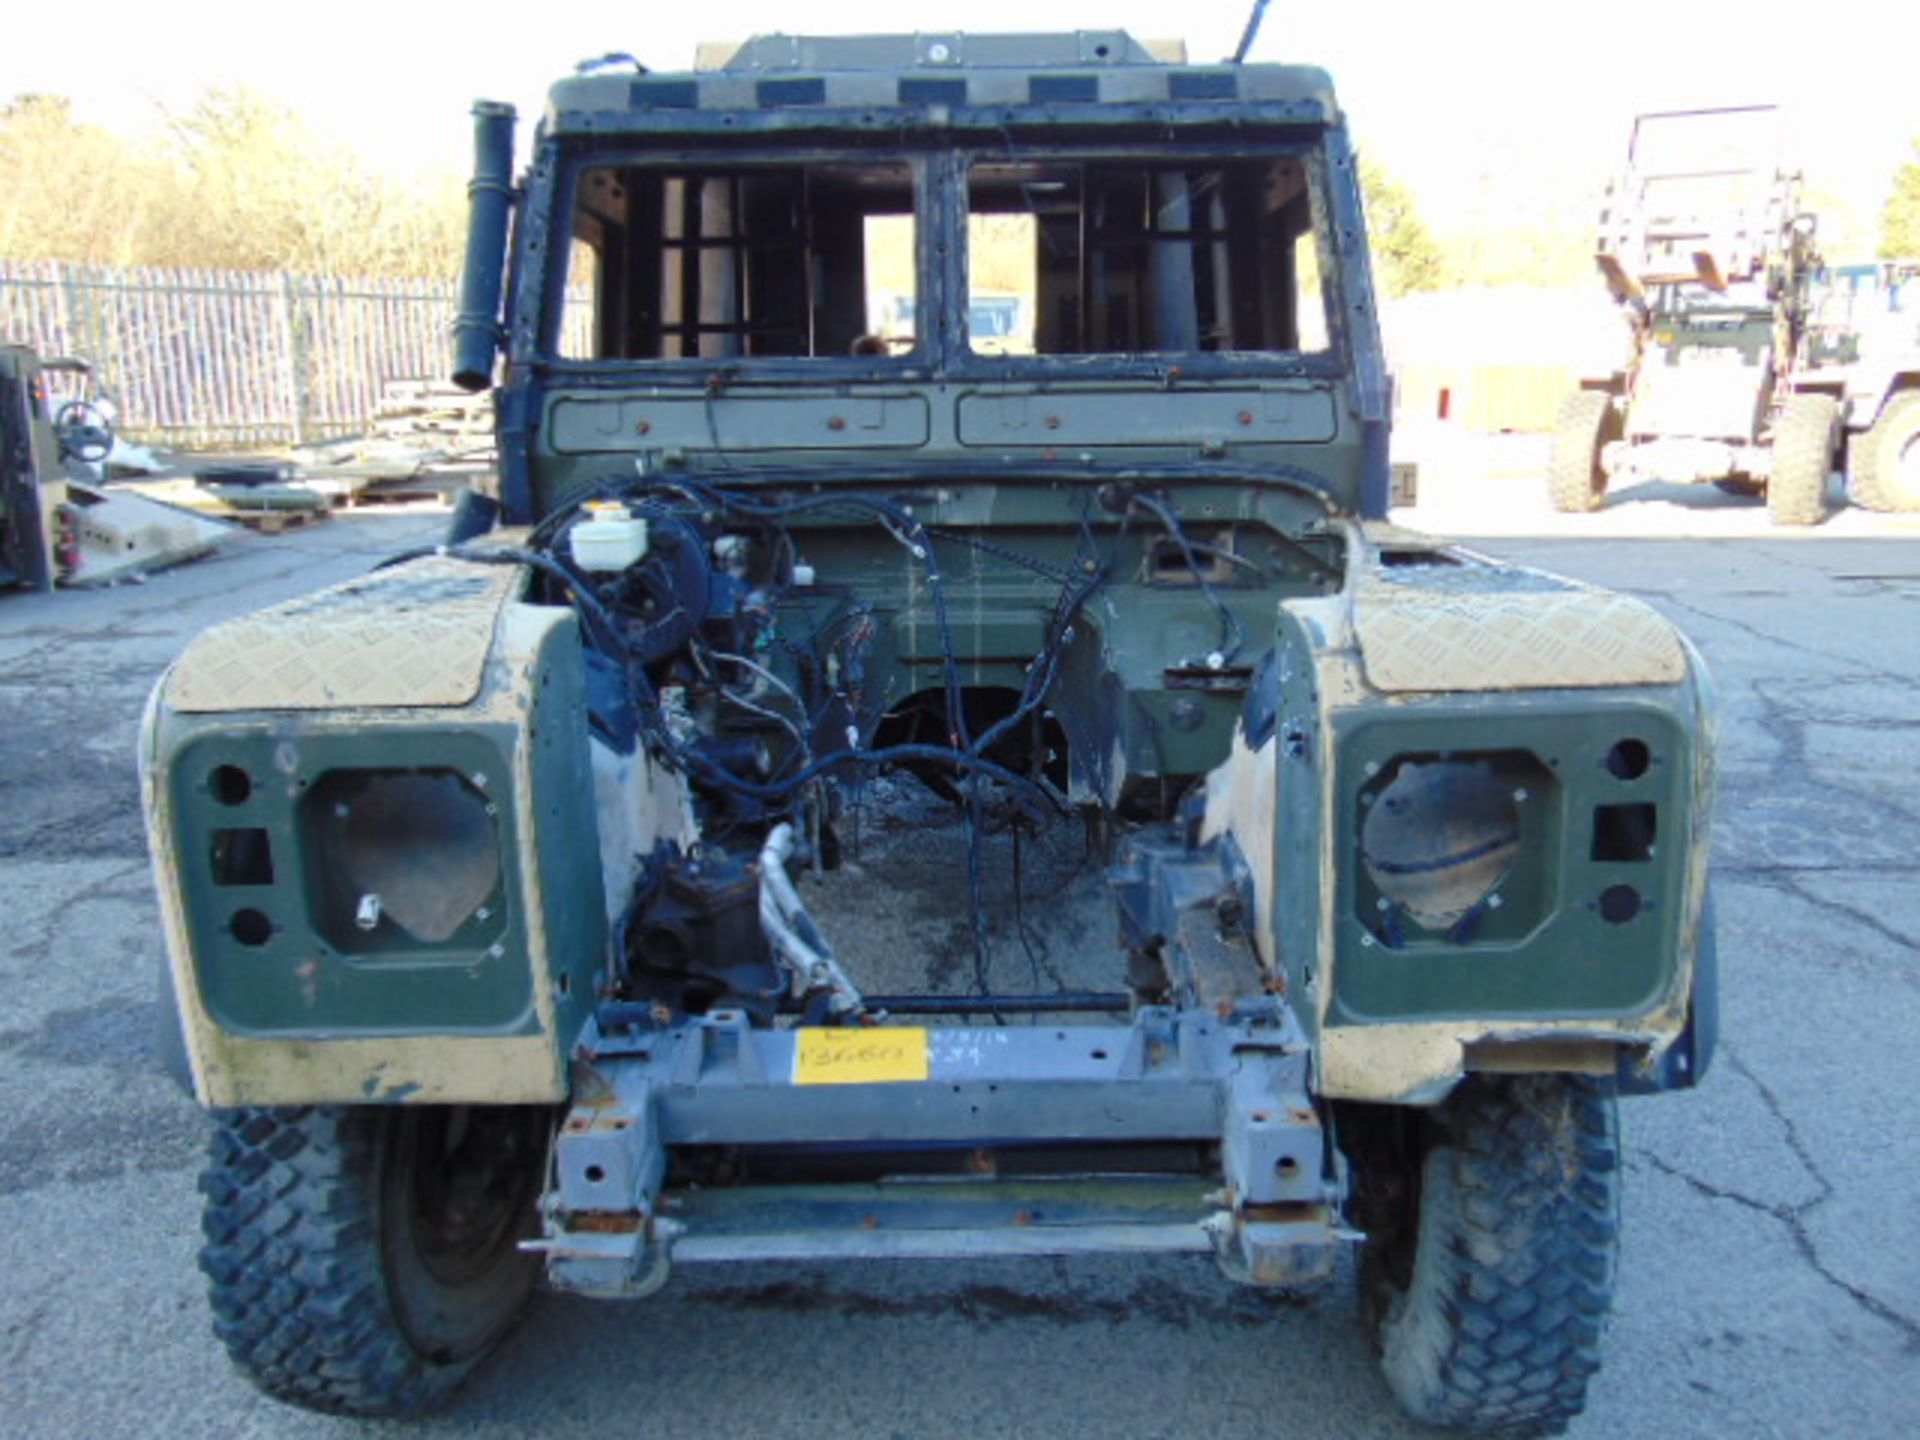 Very Rare Direct from Service Unmanned Landrover 110 300TDi Panama Snatch-2A - Image 2 of 11